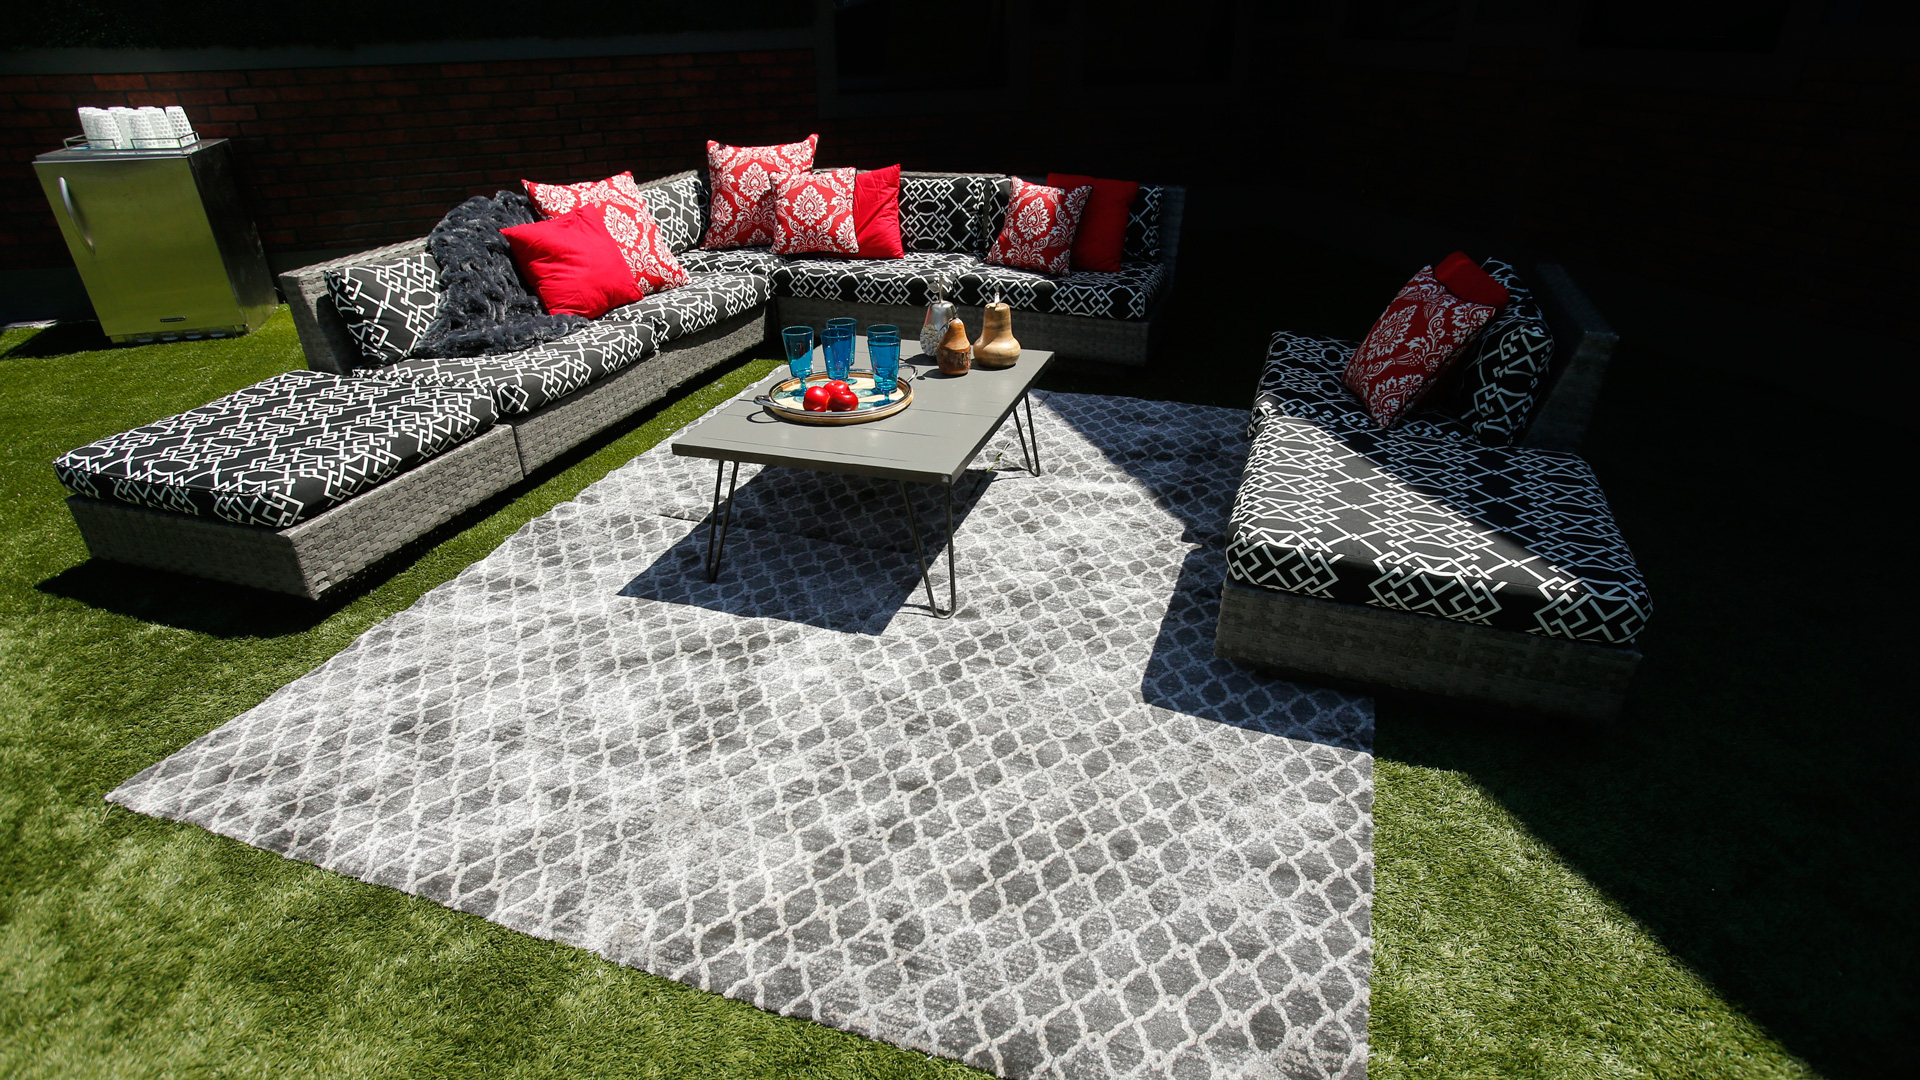 The outdoor lounge corner will tempt the Houseguests in a few ways.